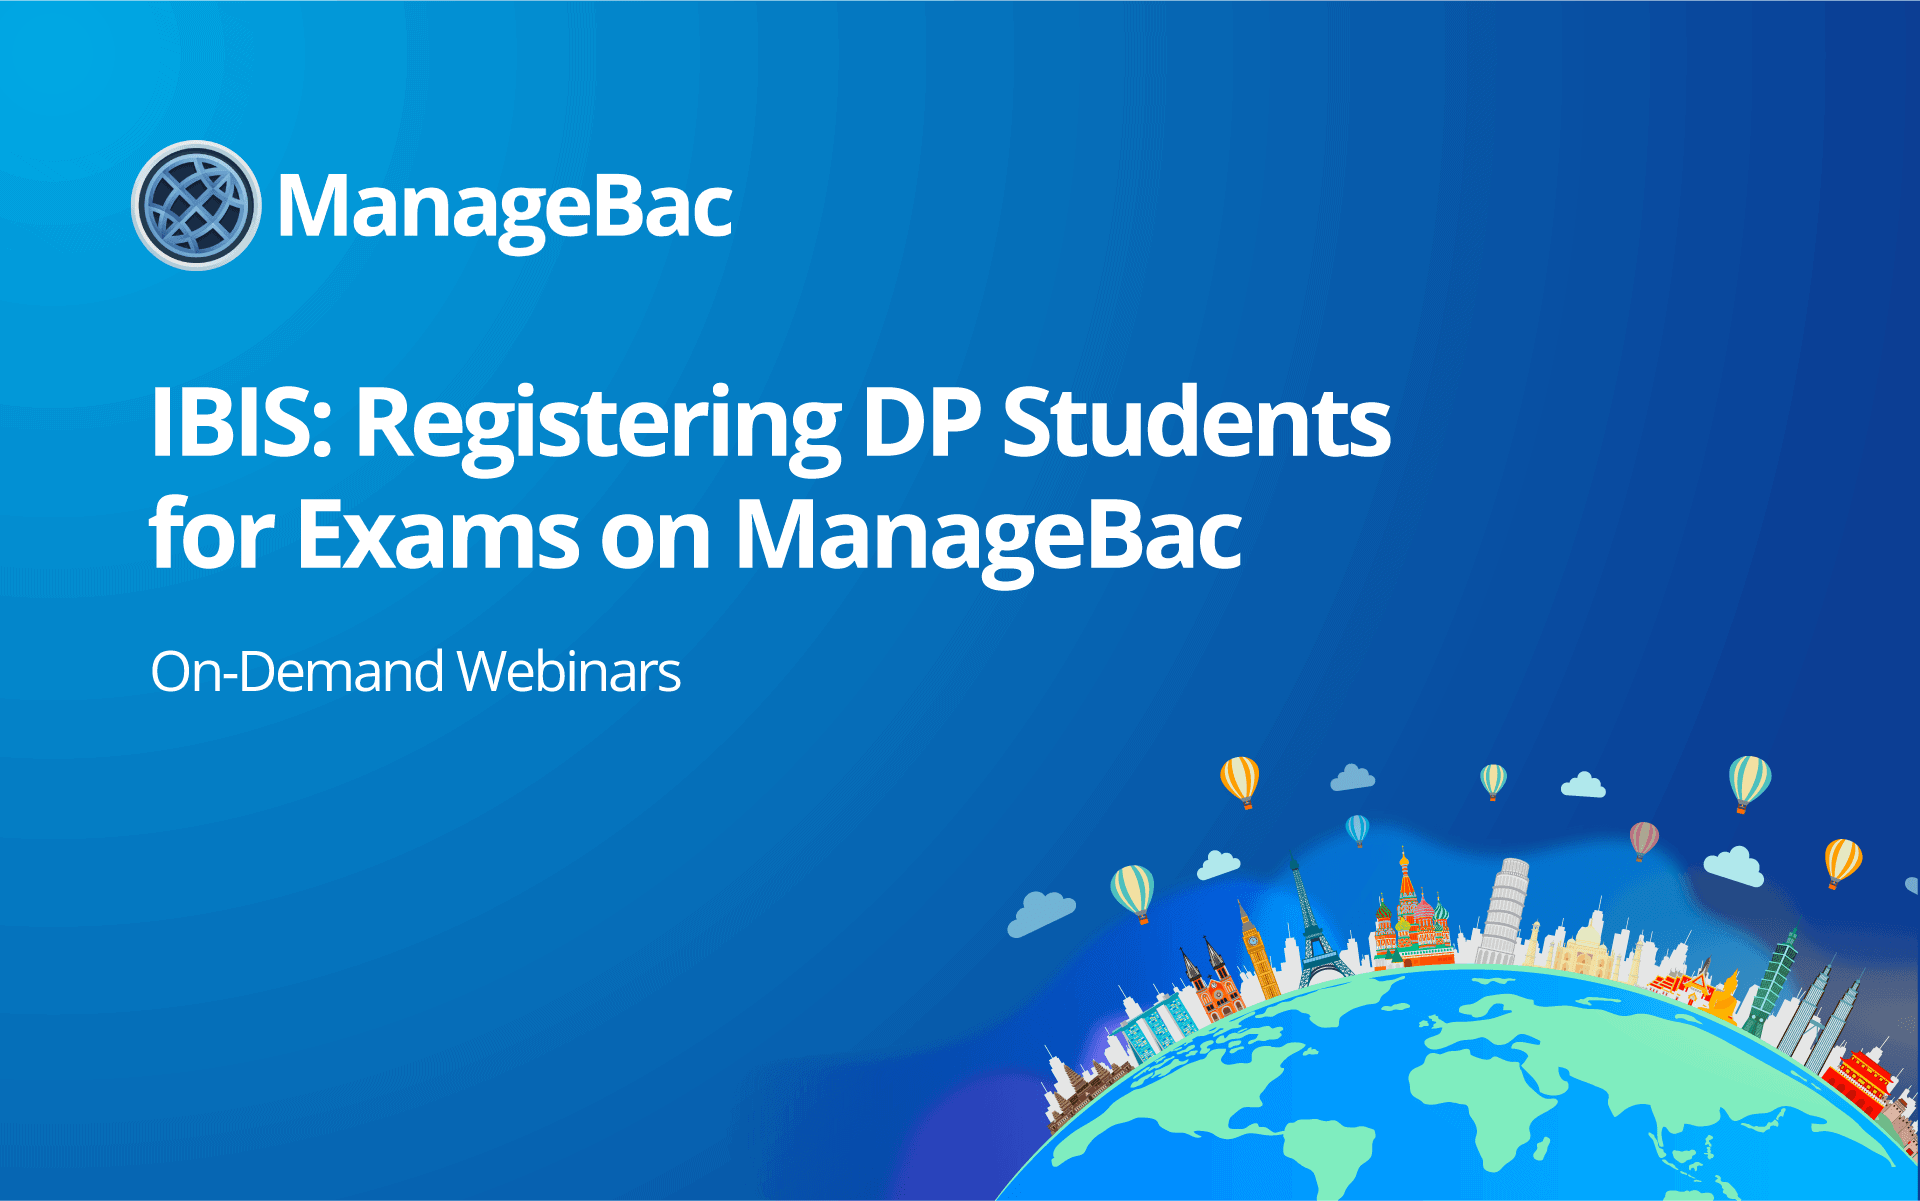 IBIS: Registering DP Students for Exams on ManageBac